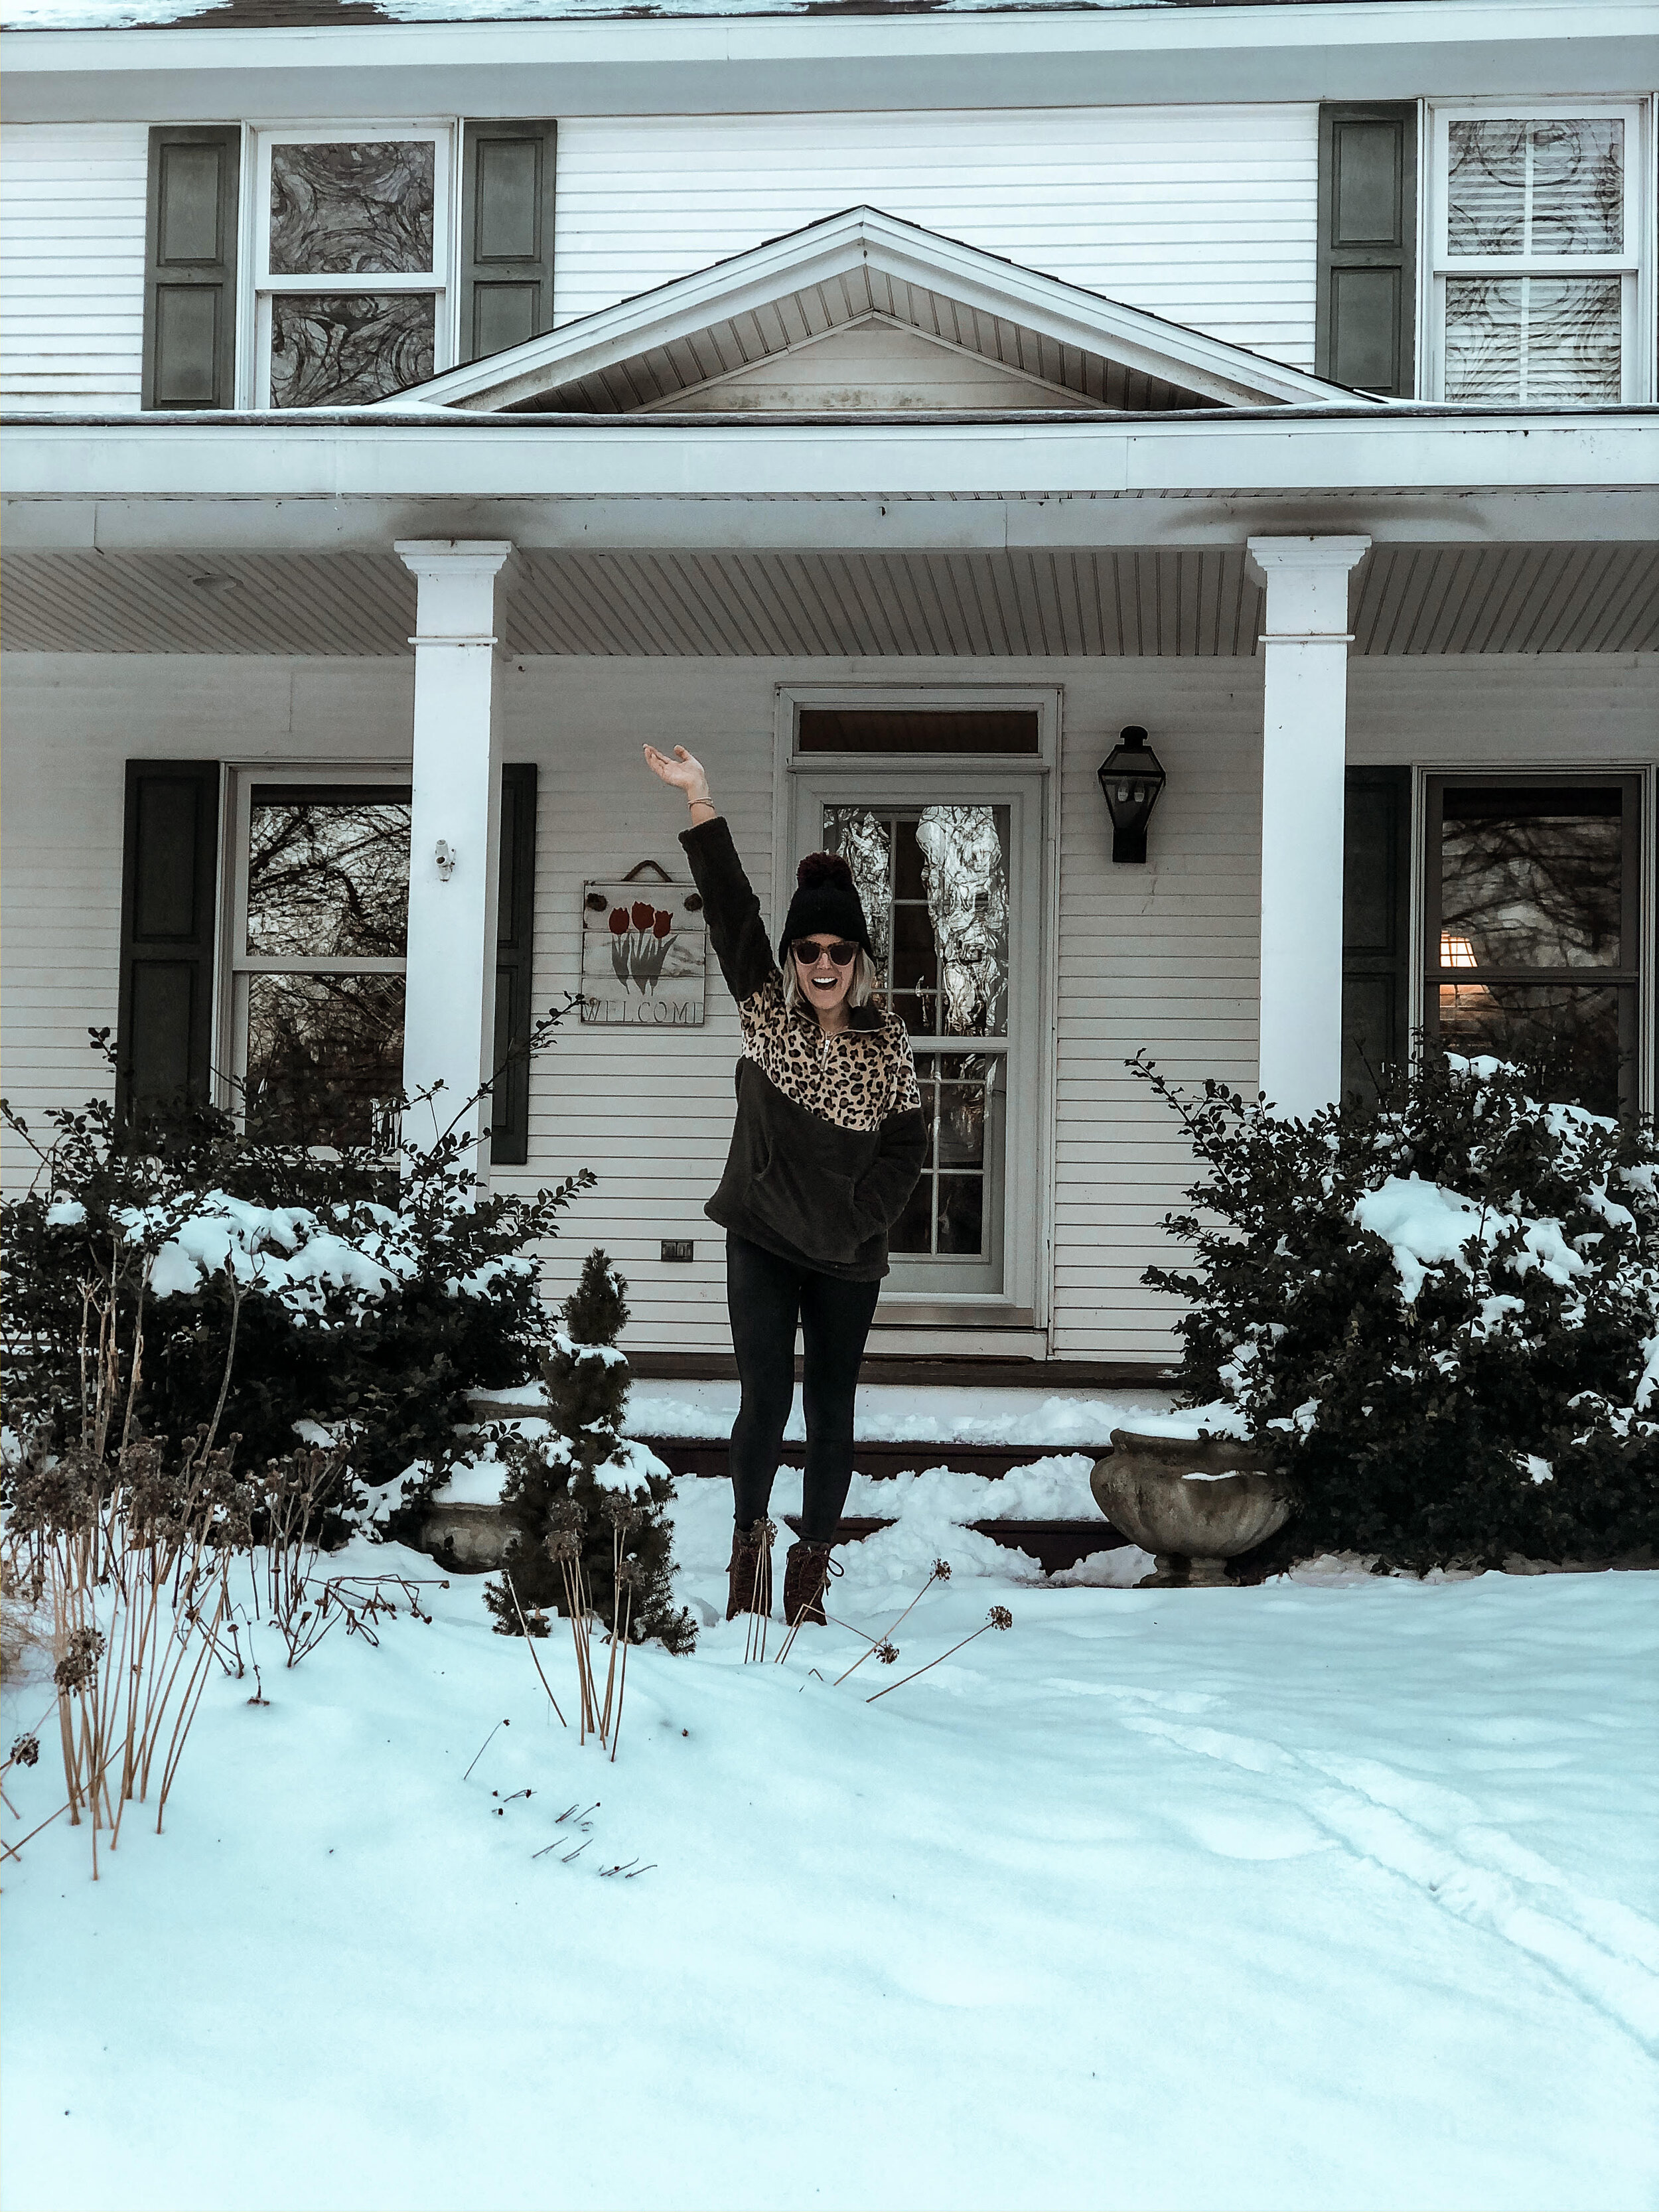 Saugatuck in the Winter! &lt;a guide on where to shop, eat, drink and do&gt;